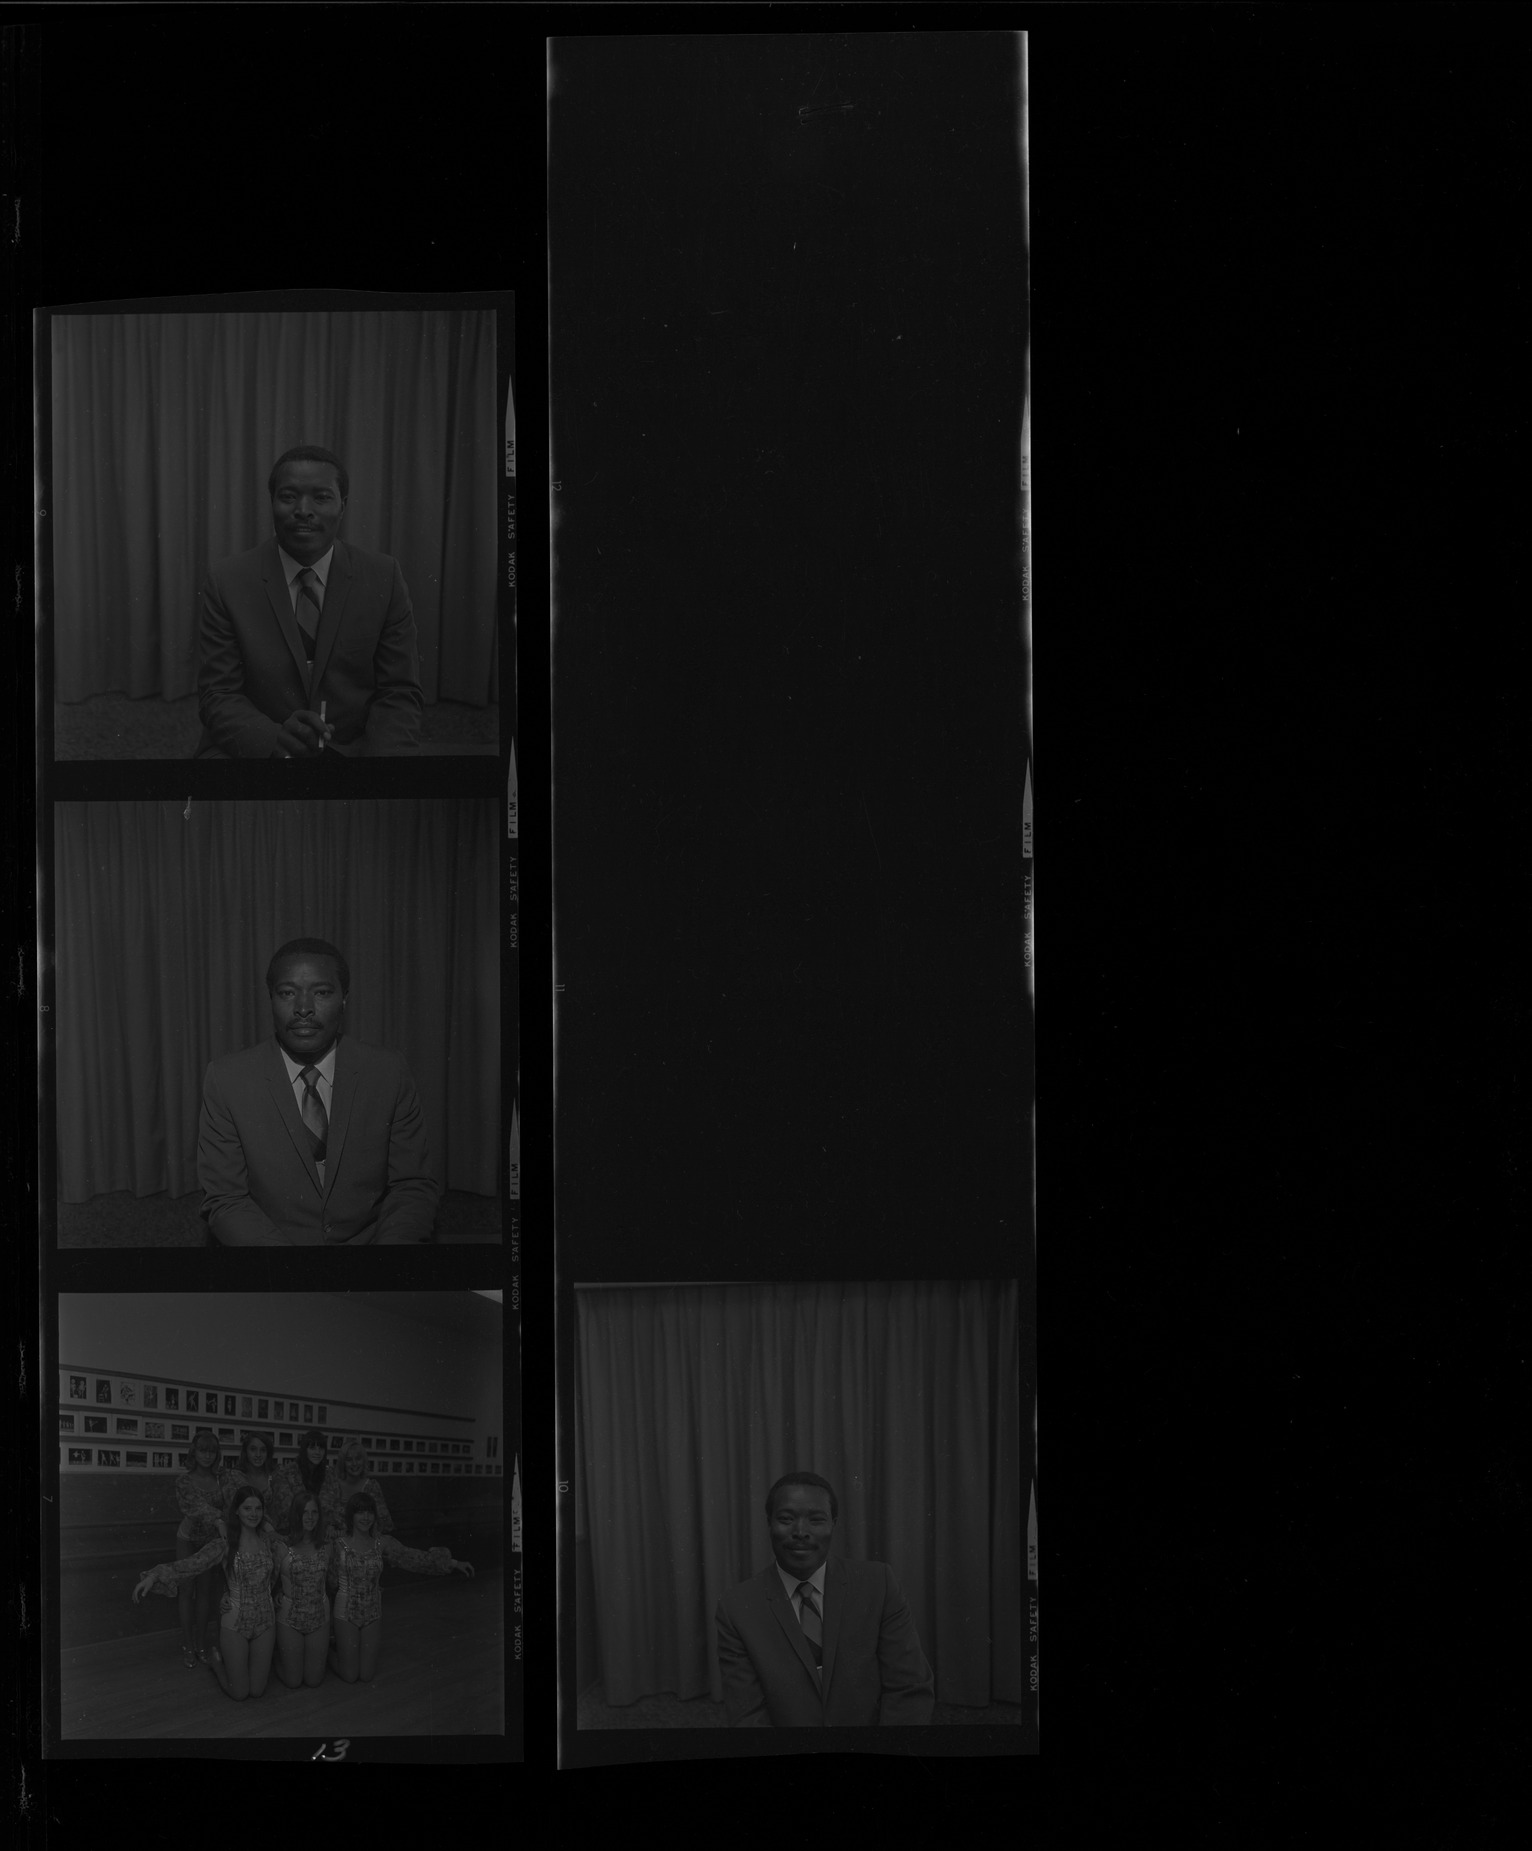 Set of negatives by Clinton Wright including Mr. & Mrs. Goynes, Mrs. Goynes at Madison, Kit Carson Award program (drill team), Jay Elliott, and Dorothy Frankivich at Dance School, 1970, page 2